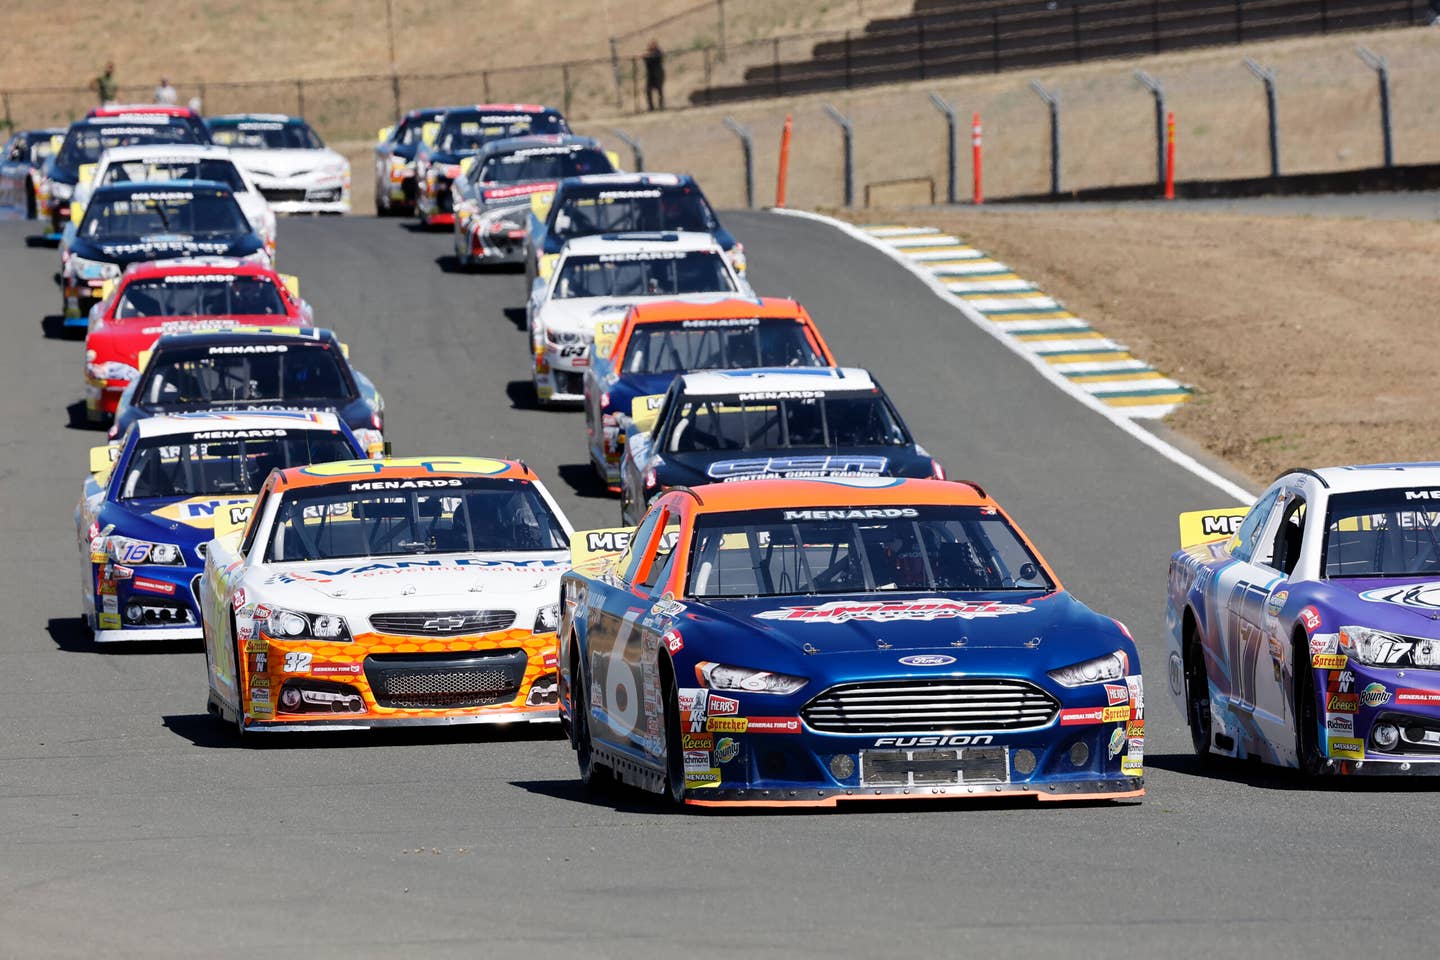 SONOMA, CA - JUNE 11: Jake Drew (#6 Irwindale Speedway-Lucas Oil-Stilo USA-Molecule Ford) leads the pack  during the Menards Series West General Tire 200 on June 11, 2022, at Sonoma Raceway in Sonoma, CA. (Photo by Bob Kupbens/Sonoma Raceway/Icon Sportswire via Getty Images)